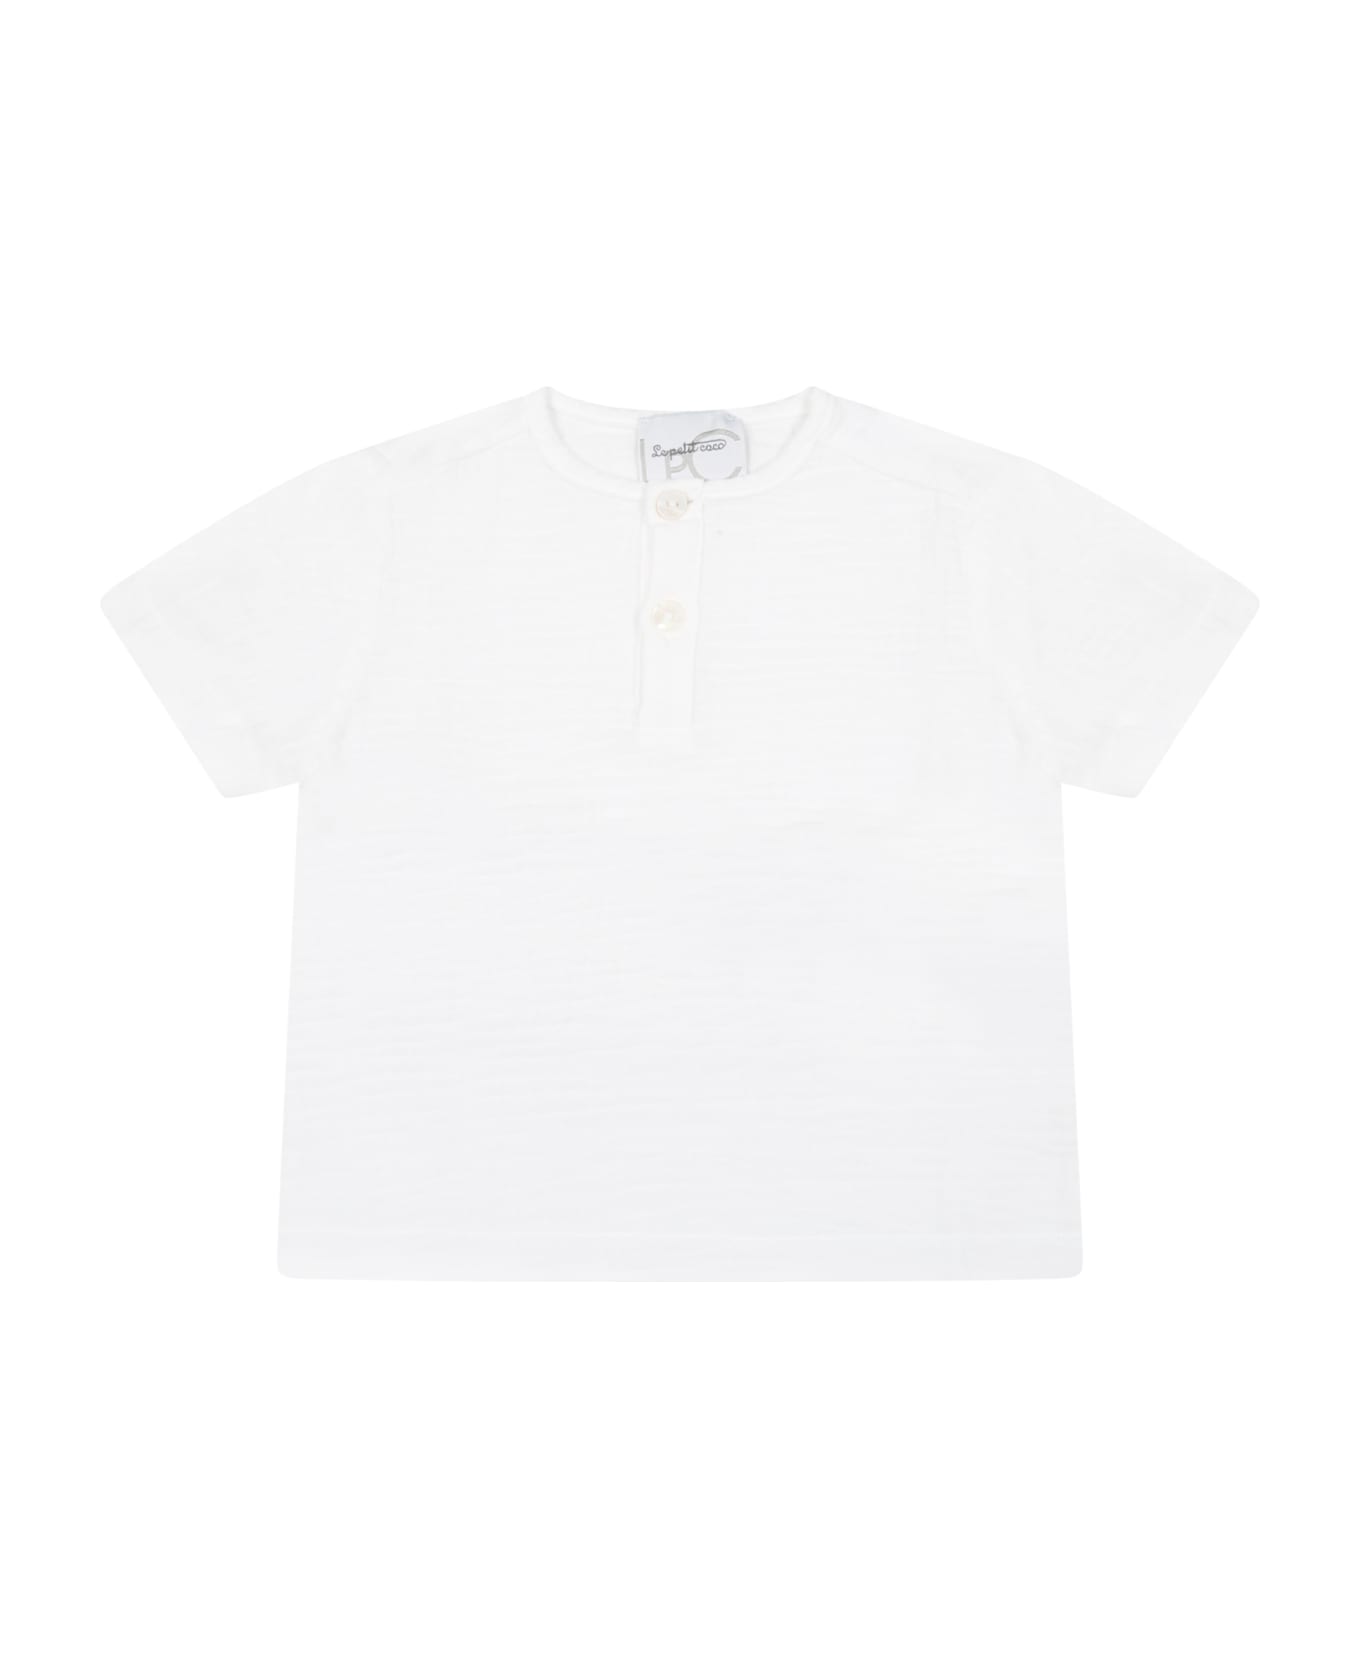 Le Petit Coco Beige T-shirt For Baby Kids - White シャツ